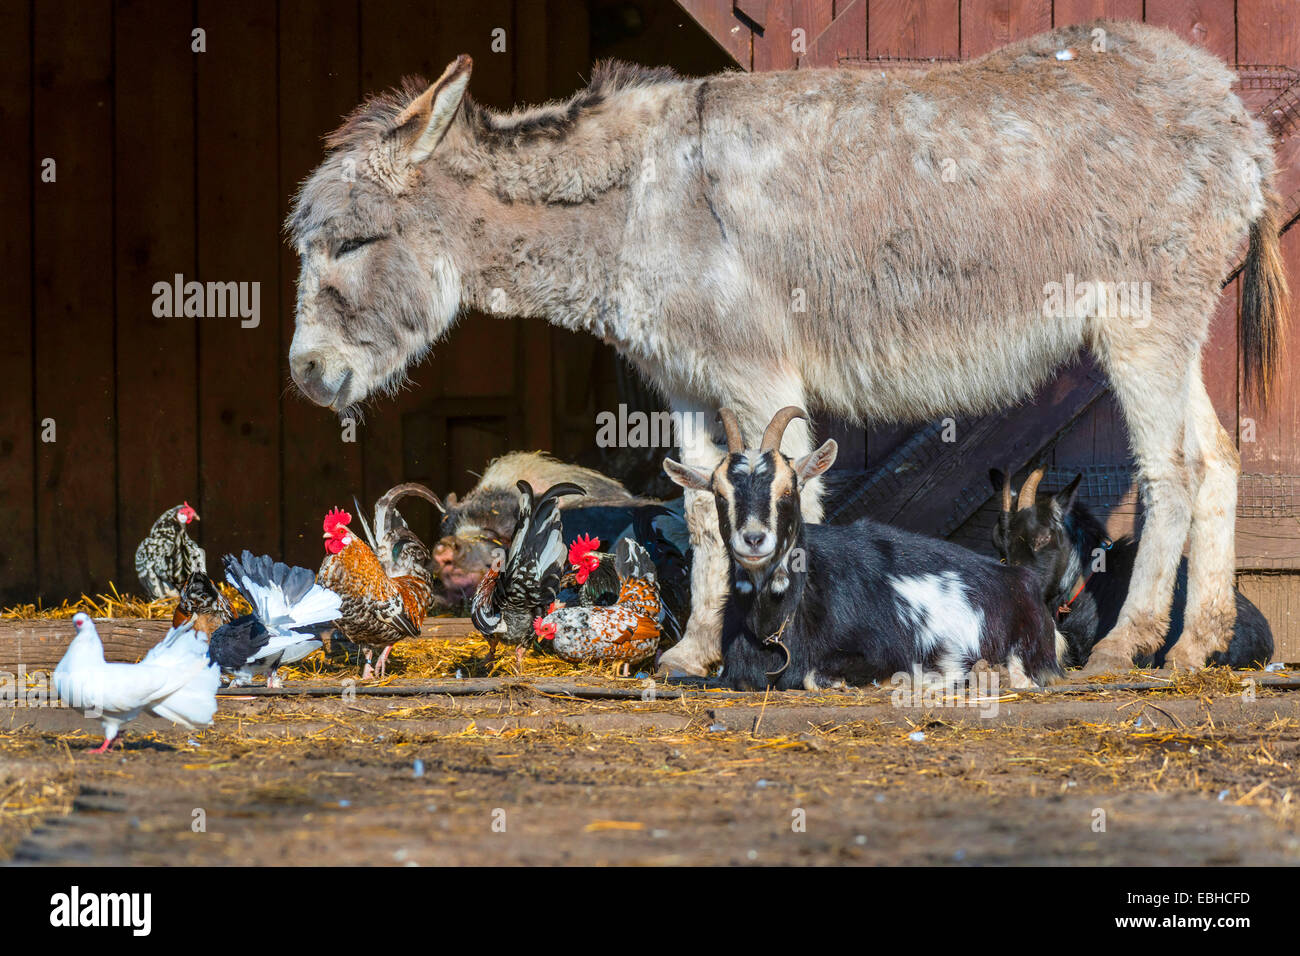 different species of farm animals in an open-air enclosure, Germany, North Rhine-Westphalia Stock Photo